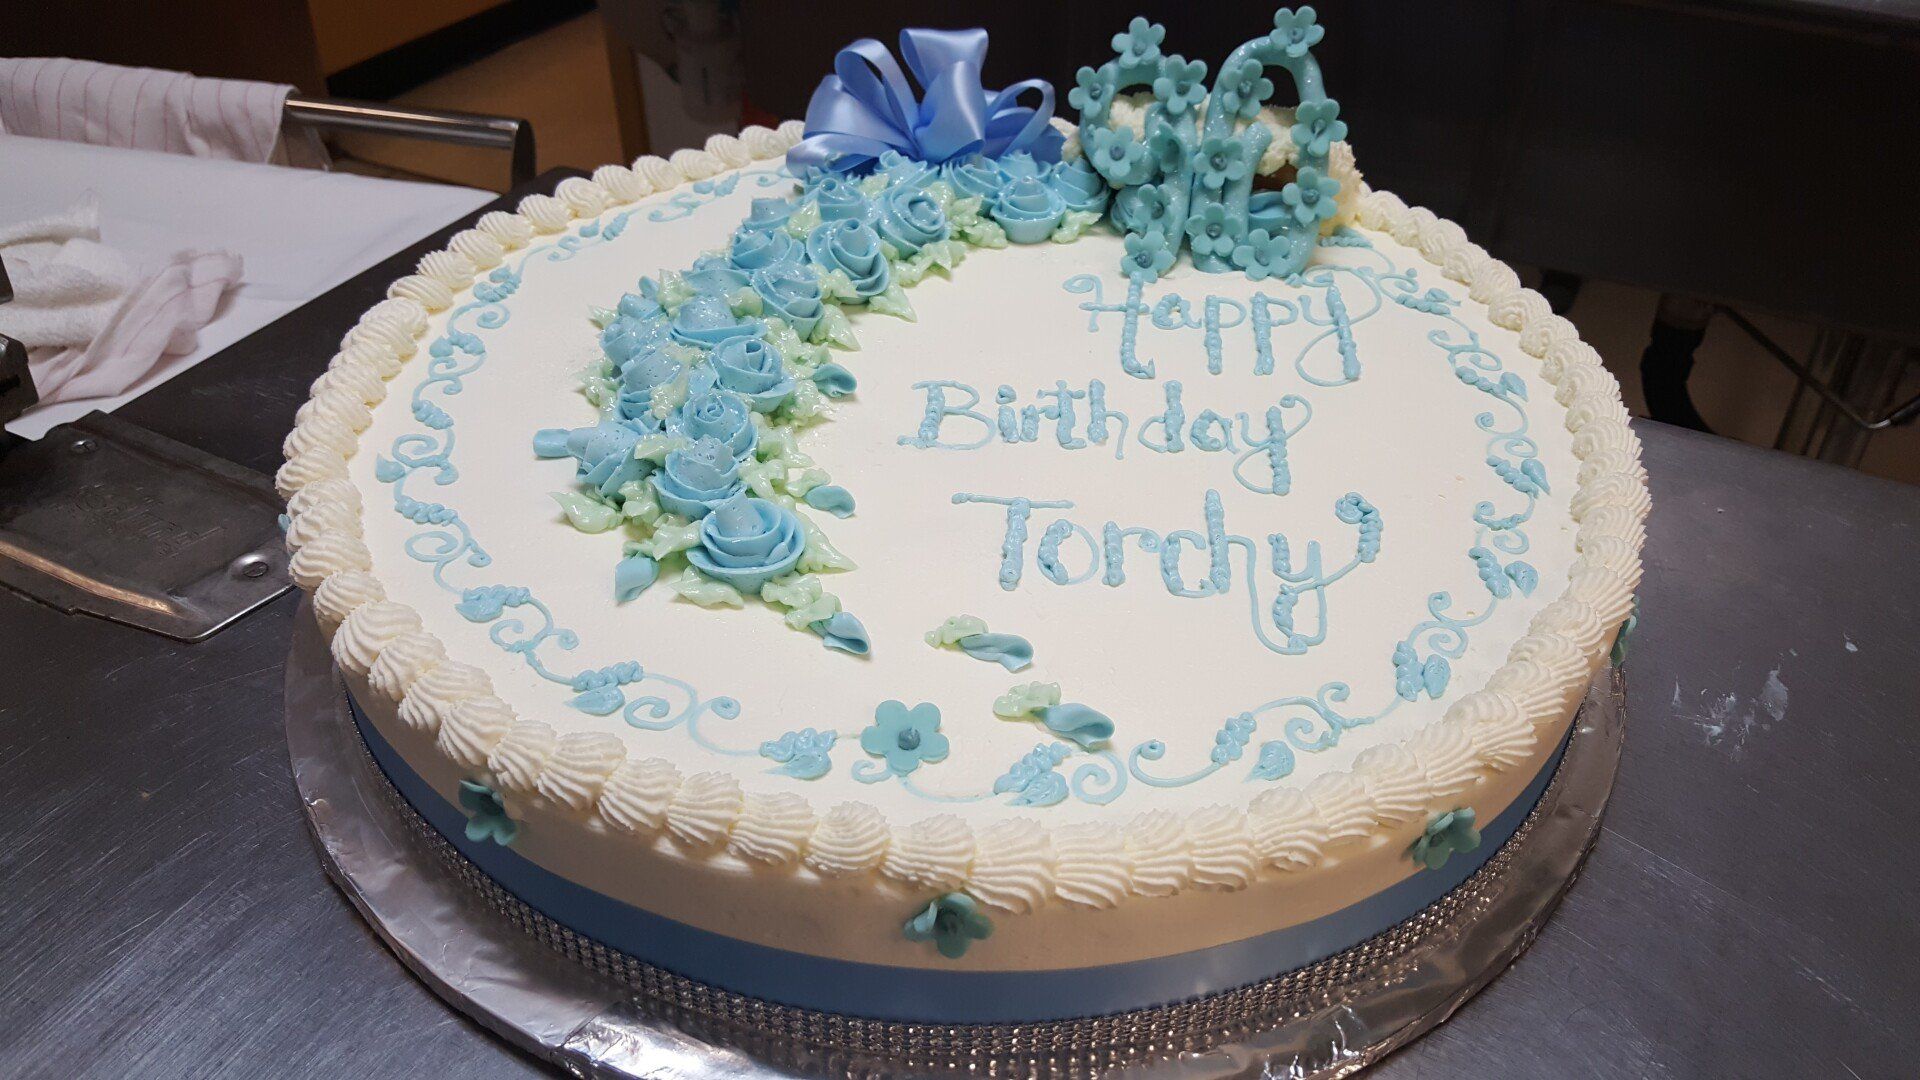 a birthday cake with blue frosting and the name terry on it